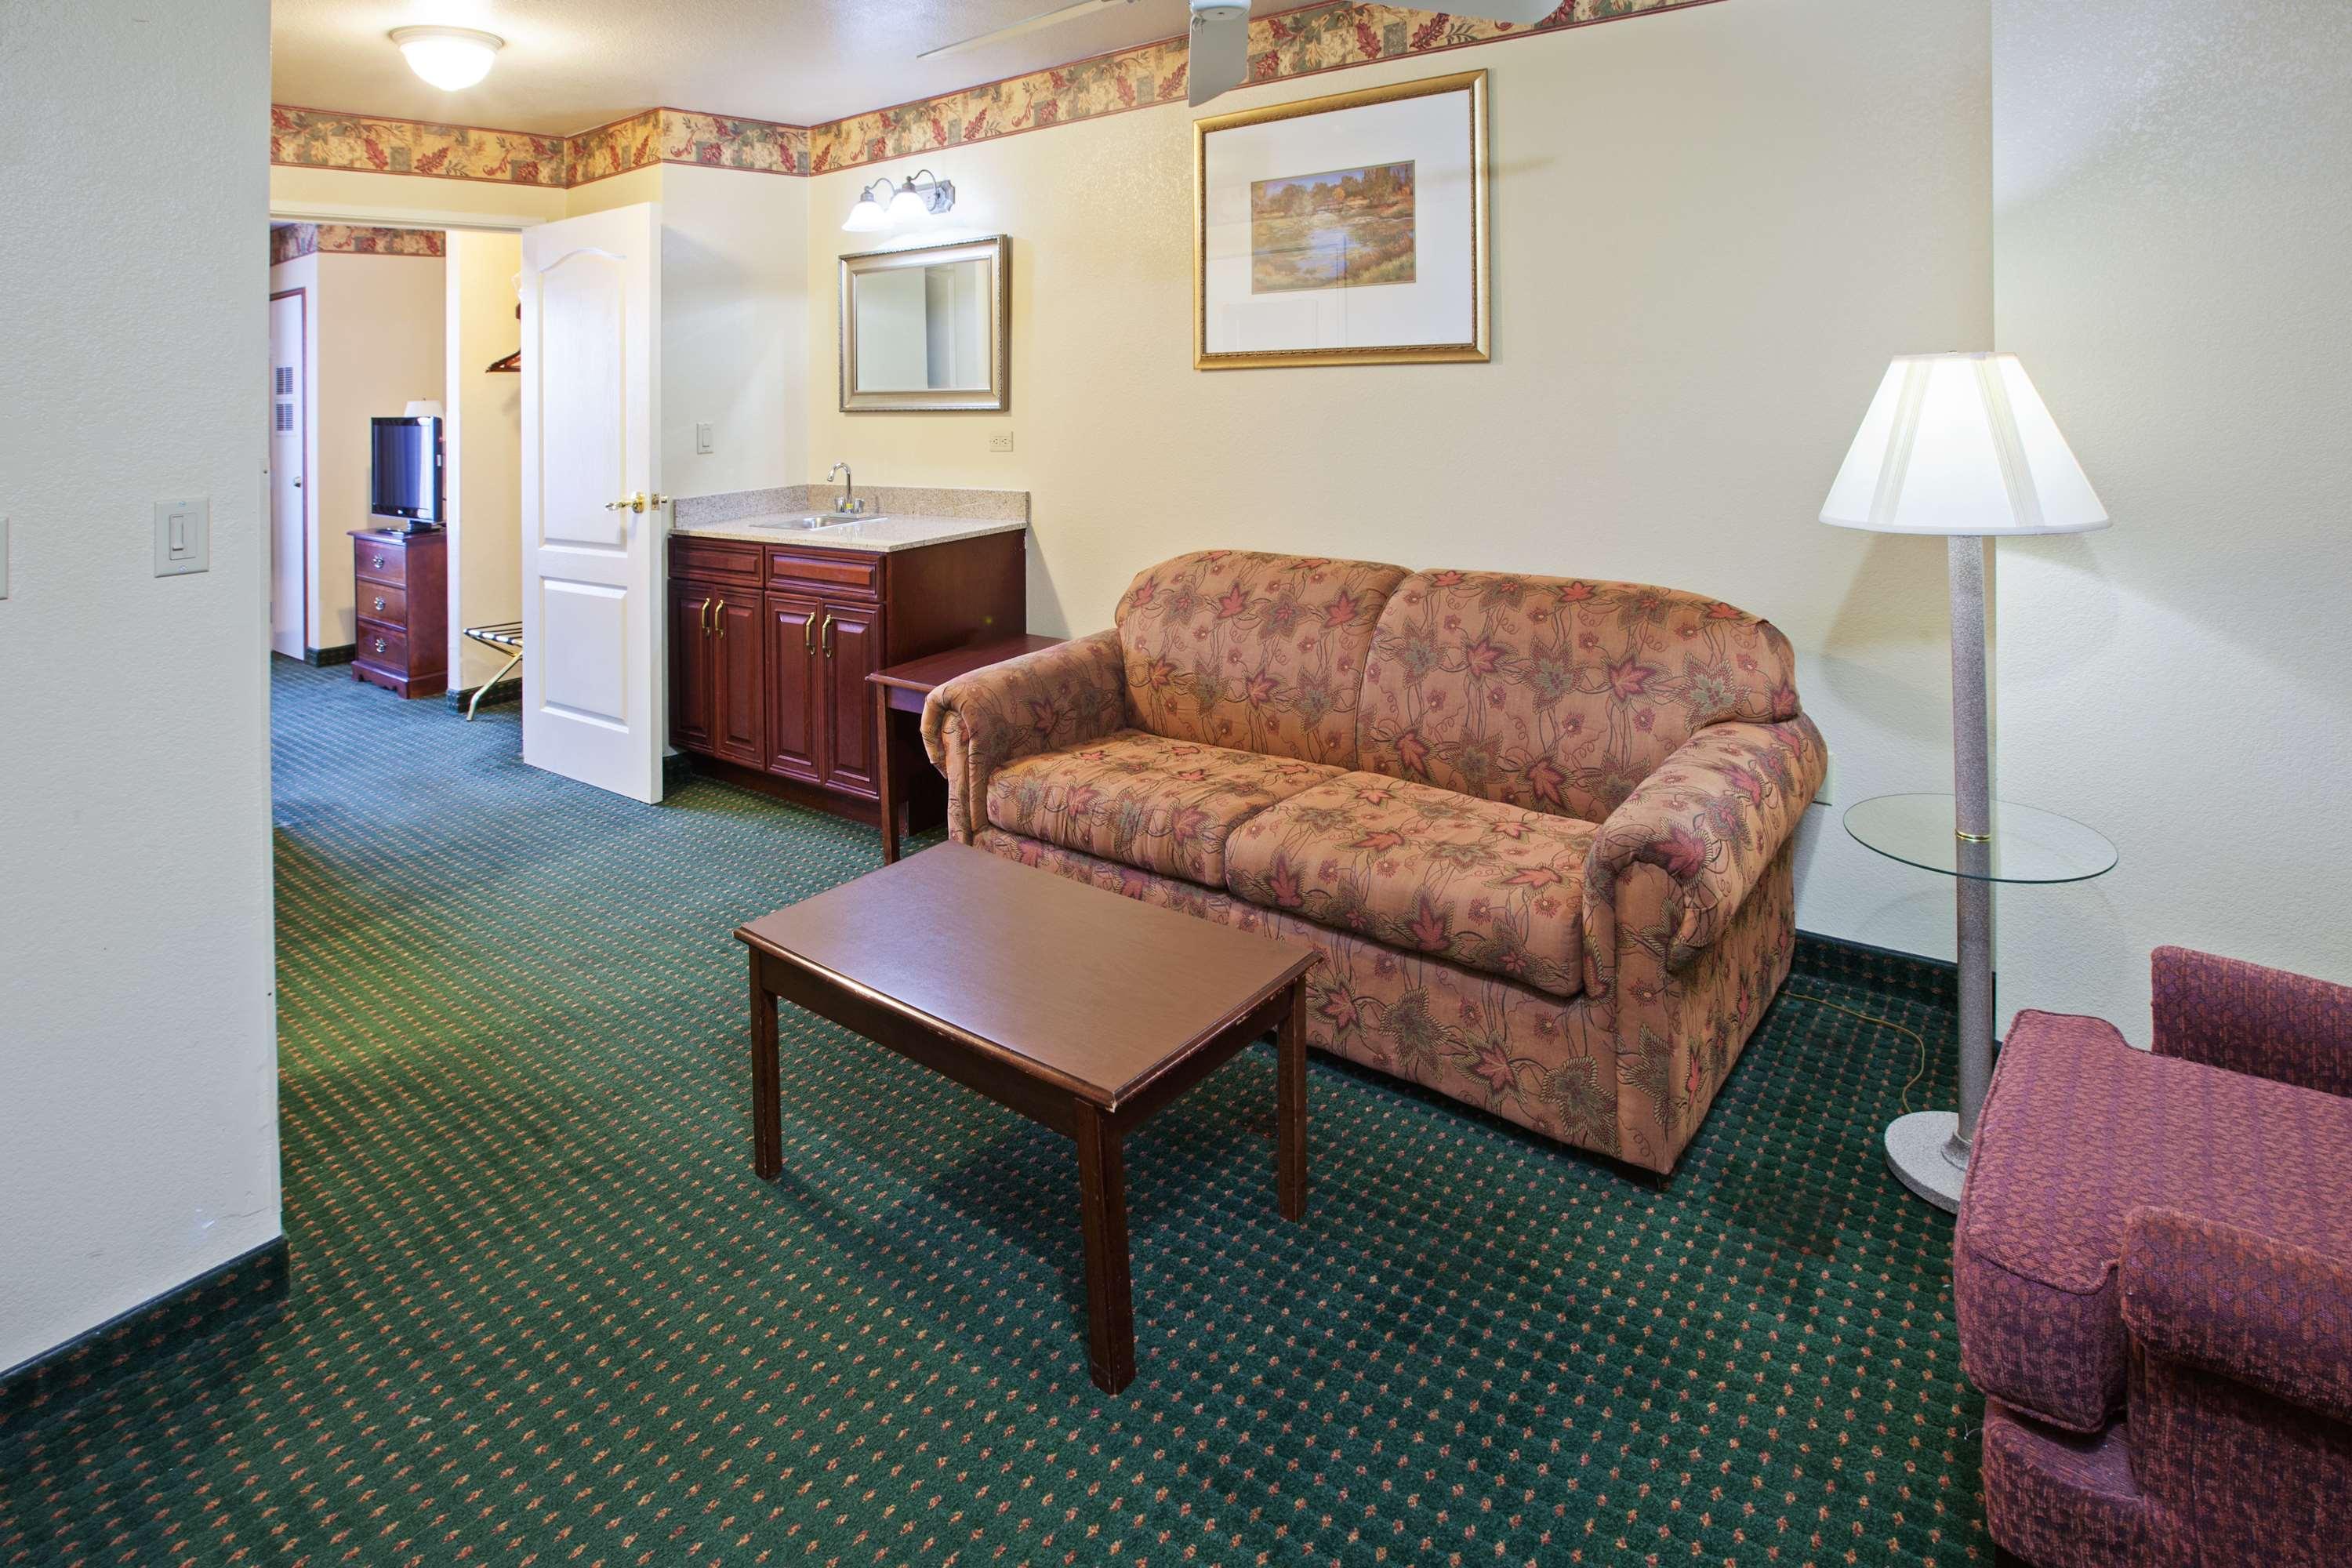 Country Inn & Suites by Radisson, Elkhart North, IN